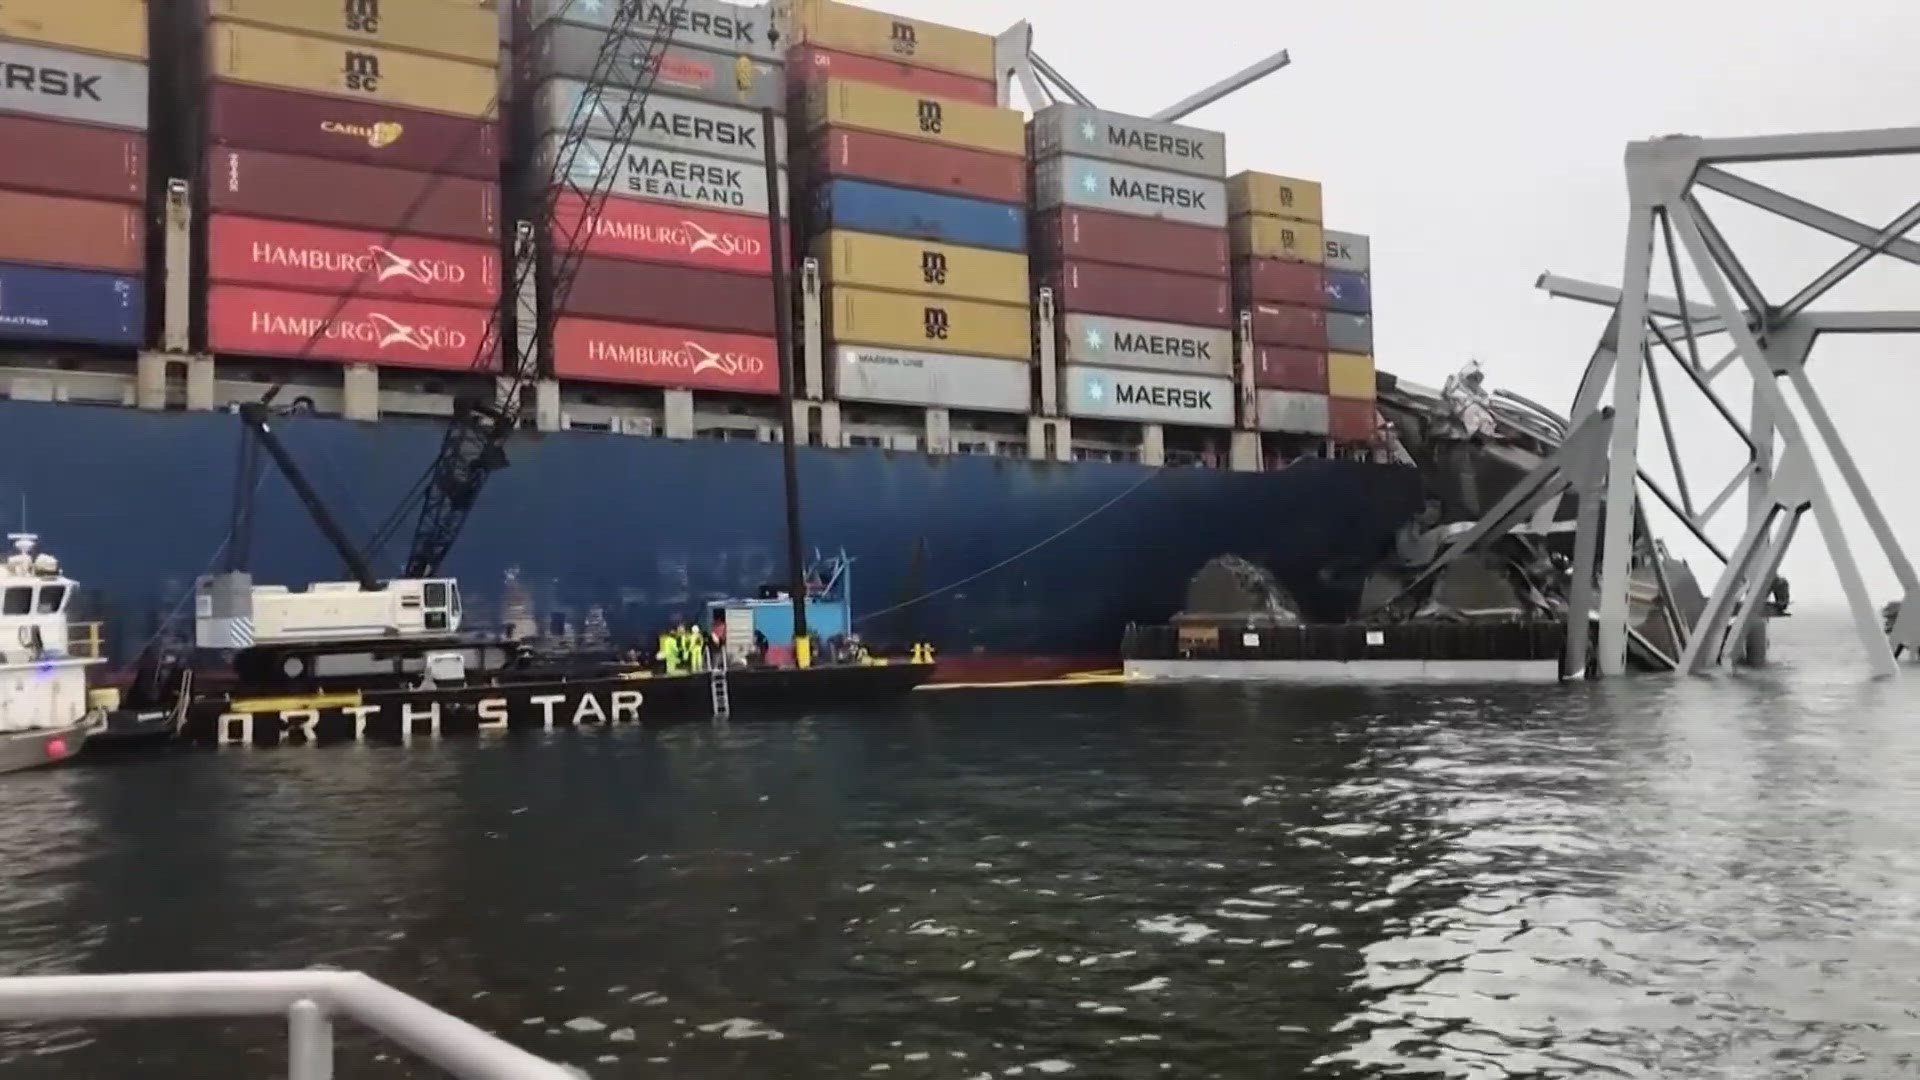 ENGINEERS AND MARITIME EXPERTS ARE RAISING THE POSSIBILITY THAT BALTIMORE'S SHIPPING CHANNEL CAN BE PARTIALLY OPENED.